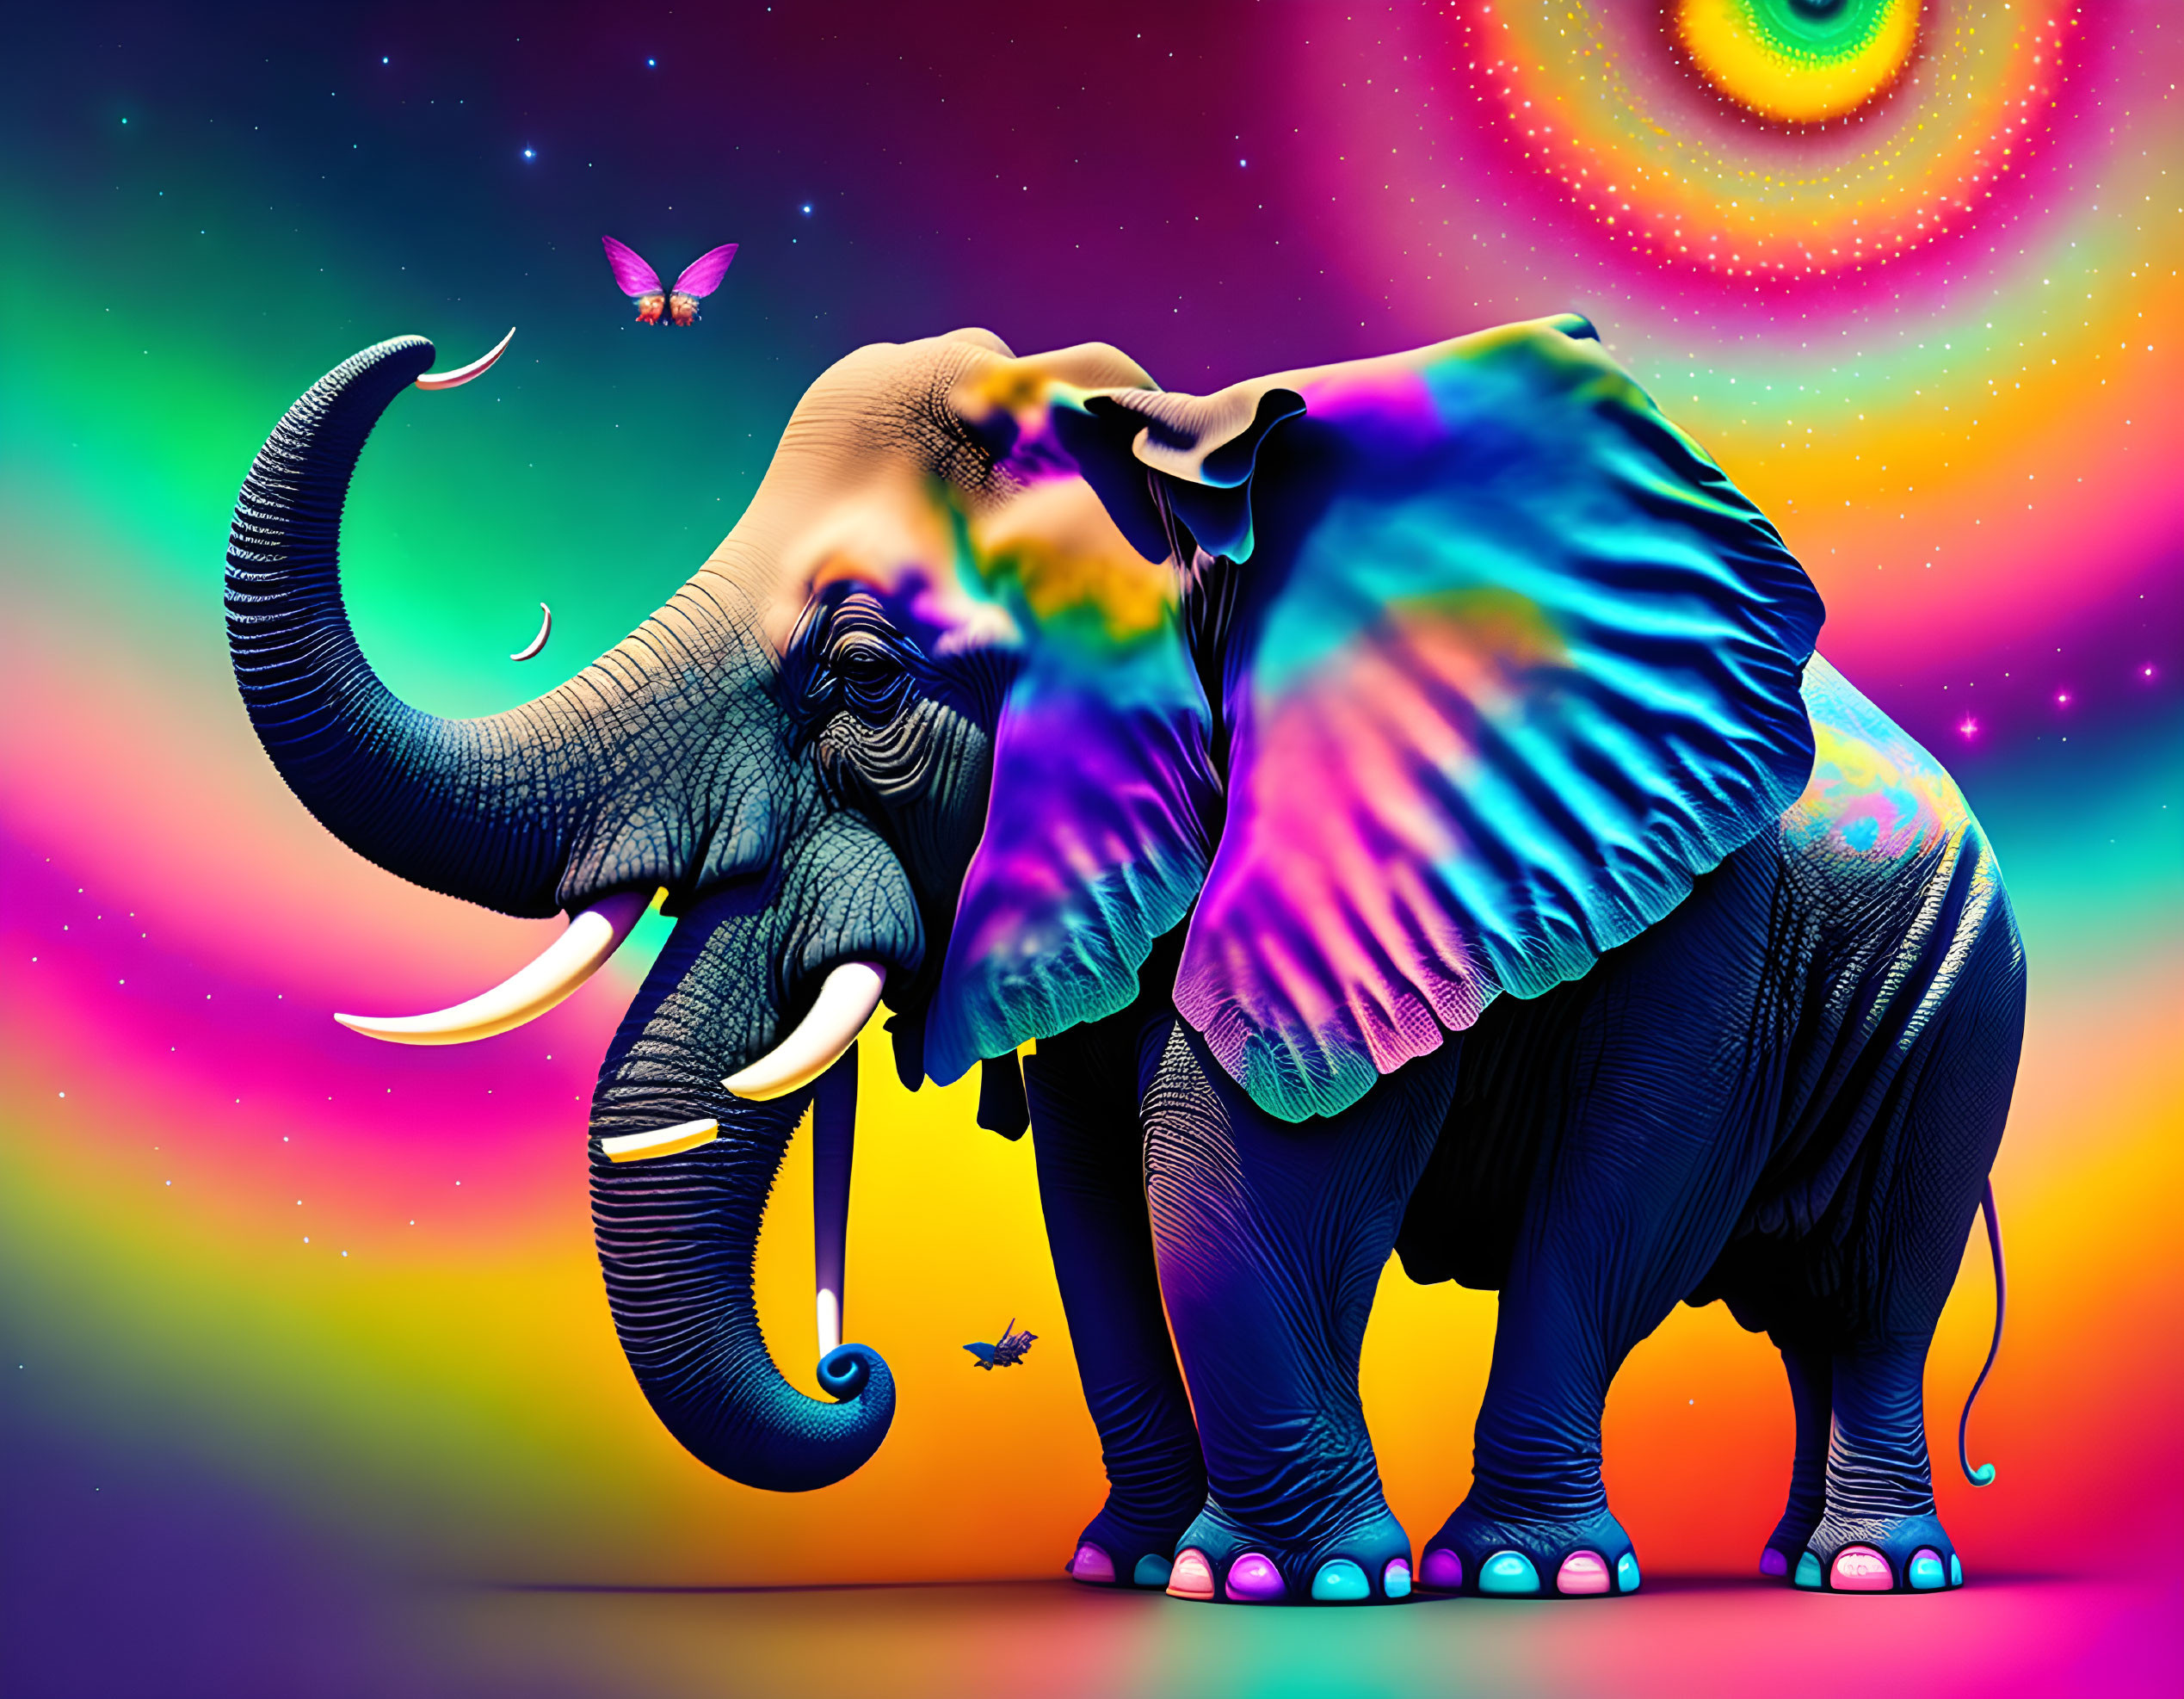 Elephant and Rhino Hybrid in a psychedelic wonderl